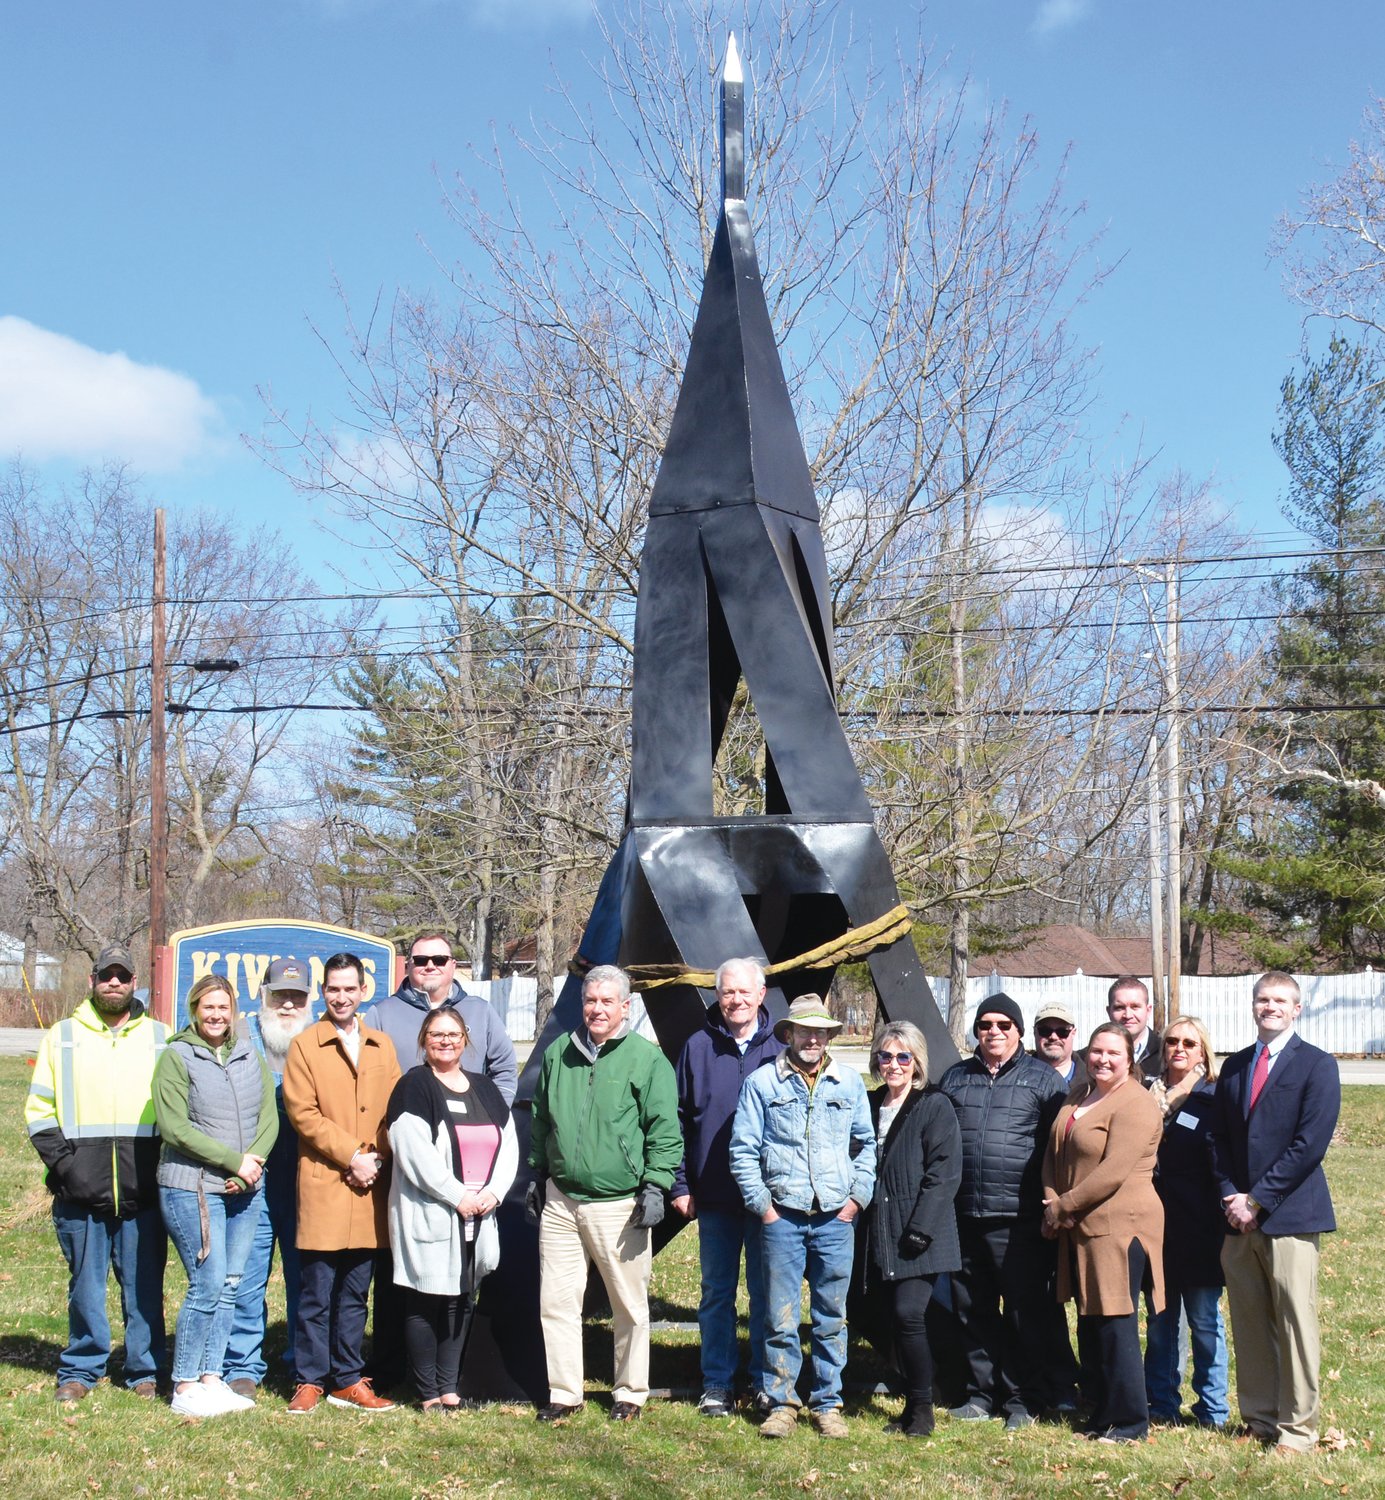 Members of the Paris Chamber of Commerce and other bystanders gather for a photo in front of Paris’ newest sculpture. From left to right, Jesse Ewing, Corby Dayton, City Superintendent Chris Redmon, Tucker Wood, Ryan Kraemer, Tessa Hutson, Doug Hasler, Tom Tuttle, designer
John Chittick, COC Executive Director Linda Lane, City Commissioner Harry Hughes, Cliff Macke, COC President Paige Moreschi, Andrew Garvin, Callie Baber and Phil Dobelstein, Present but not pictured were Craig Smith, COC Vice President Sondi Dobelstein and Bob Colvin.